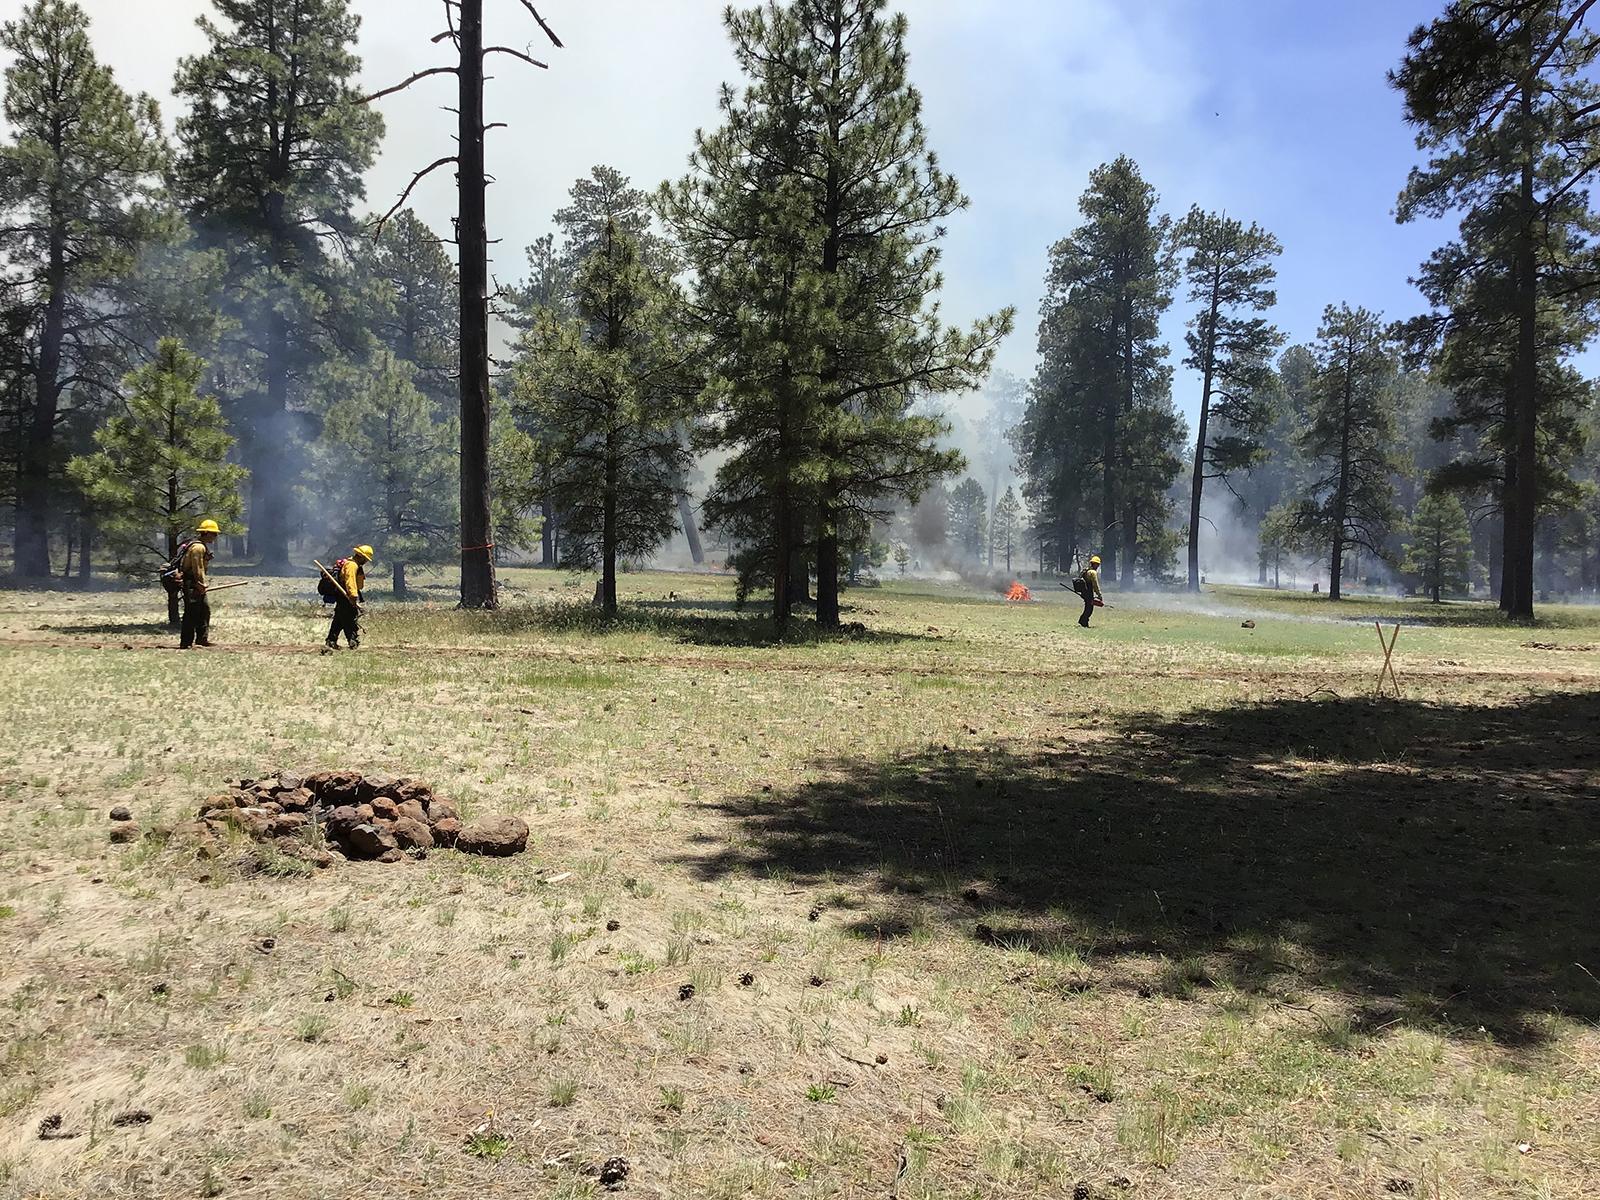 Firefighters lighting and monitoring the prescribed fire.